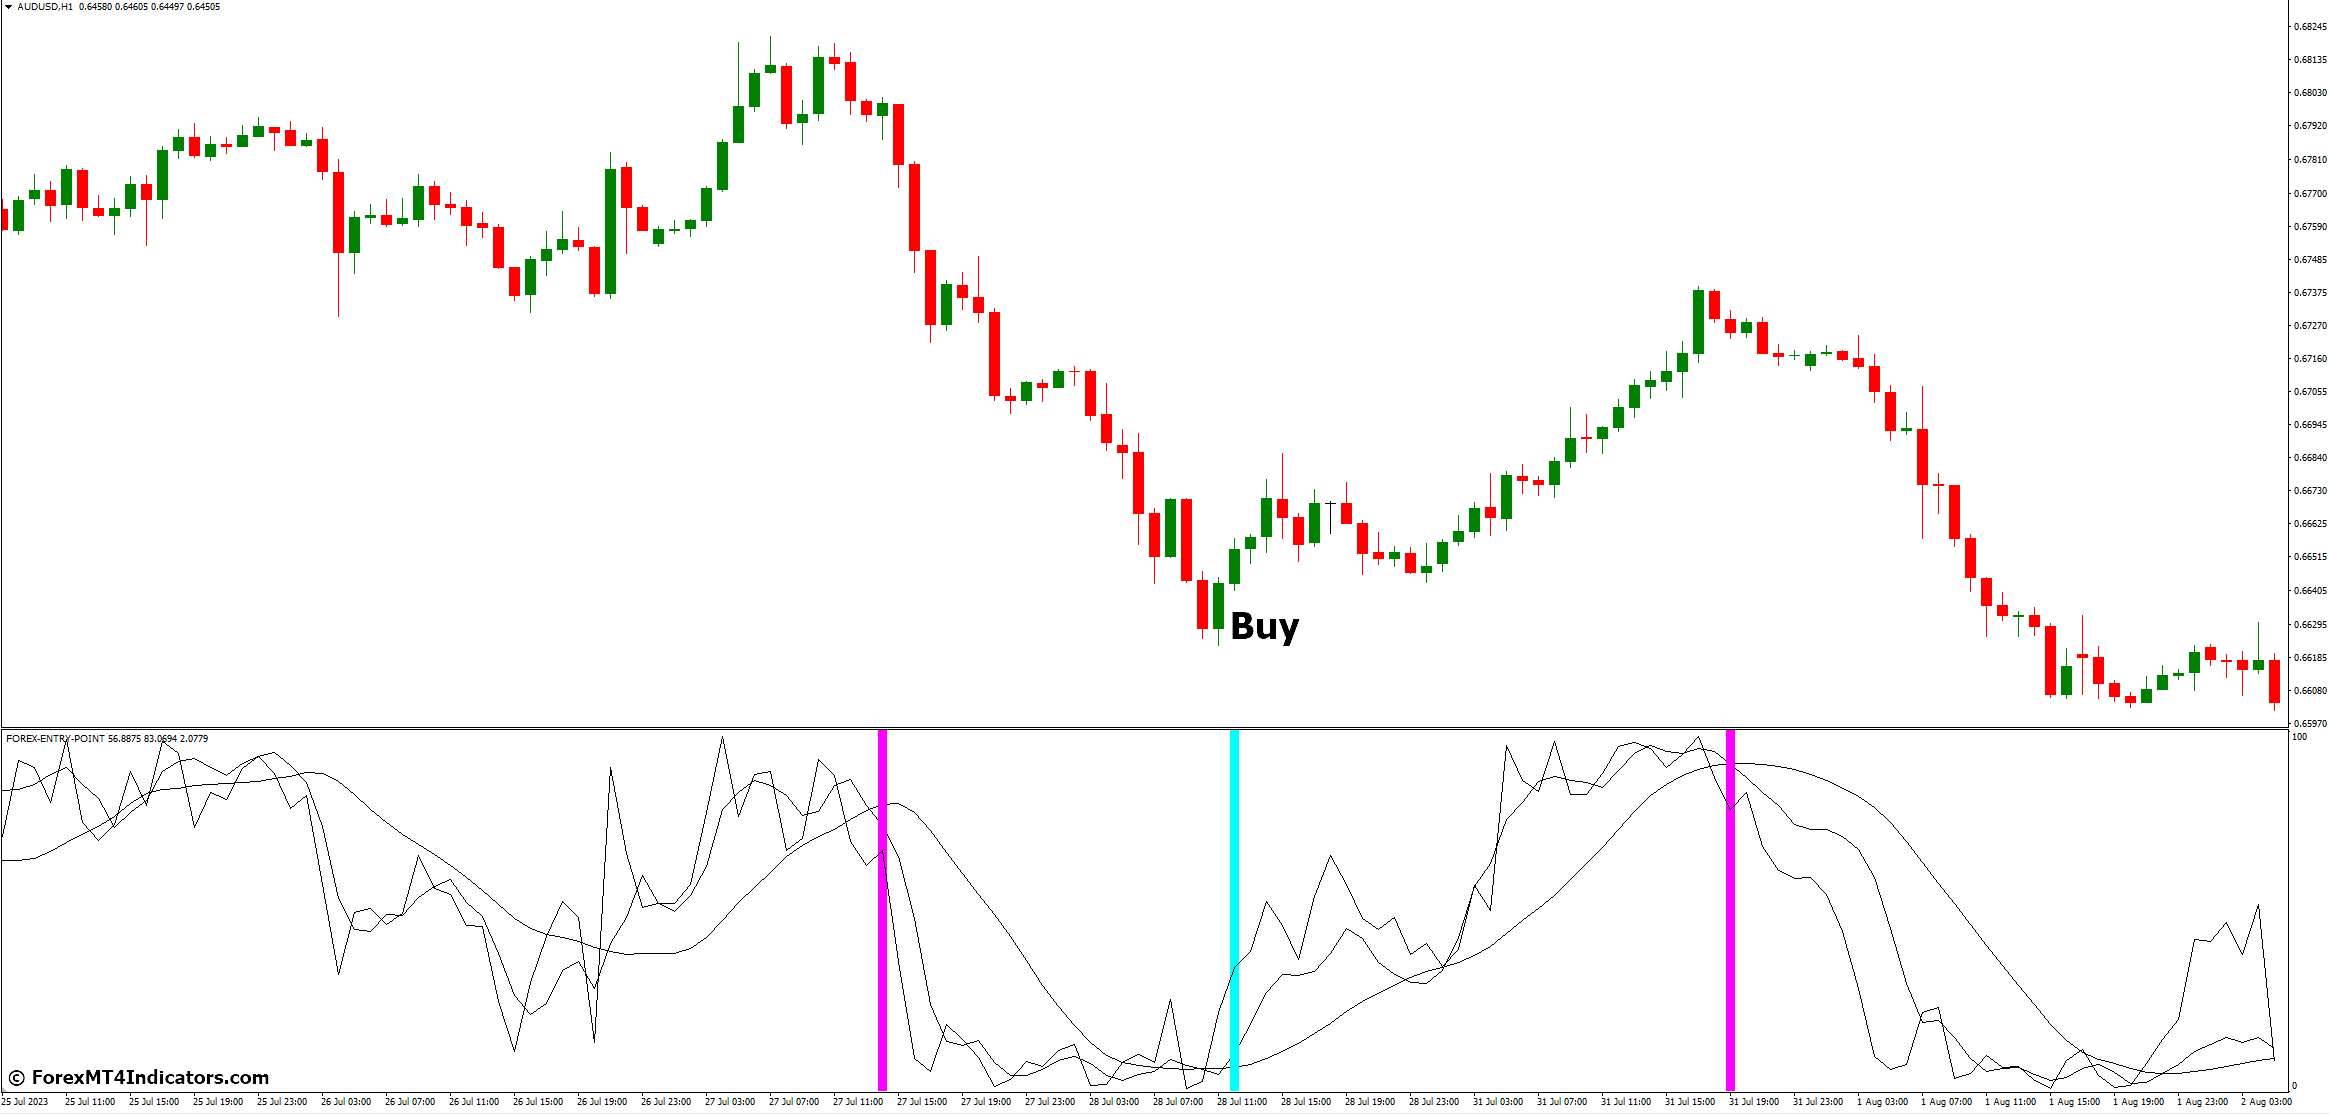 How to Trade with Forex Entry Point MT4 Indicator - Buy Entry